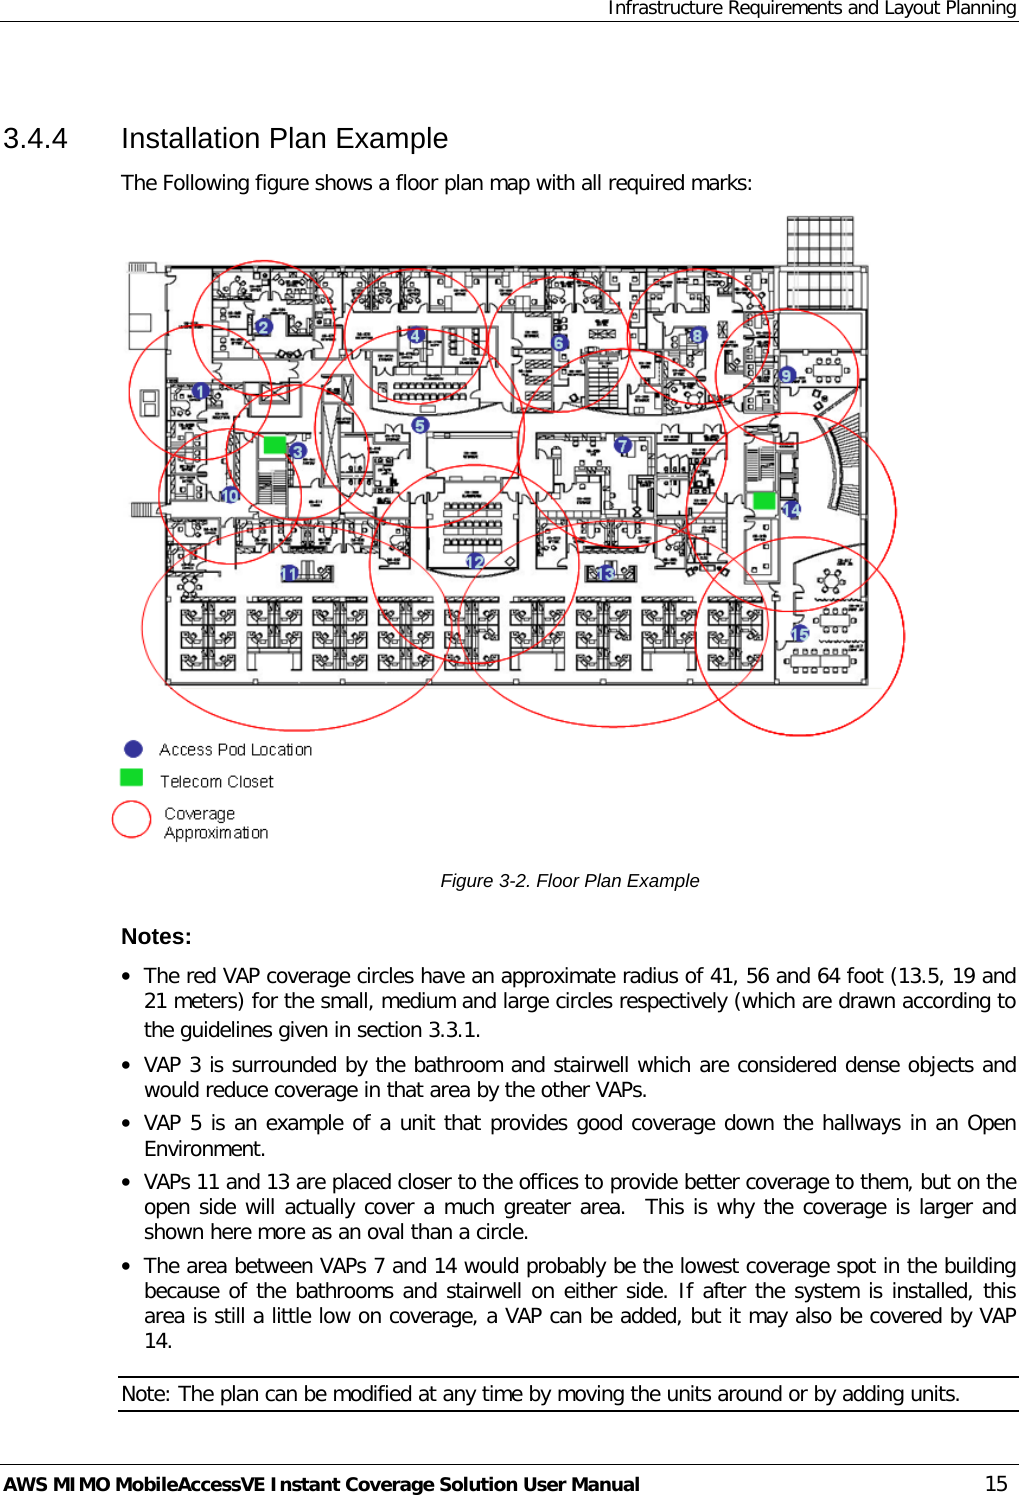 Infrastructure Requirements and Layout Planning AWS MIMO MobileAccessVE Instant Coverage Solution User Manual  15  3.4.4  Installation Plan Example The Following figure shows a floor plan map with all required marks:  Figure  3-2. Floor Plan Example Notes: • The red VAP coverage circles have an approximate radius of 41, 56 and 64 foot (13.5, 19 and 21 meters) for the small, medium and large circles respectively (which are drawn according to the guidelines given in section  3.3.1.  • VAP 3 is surrounded by the bathroom and stairwell which are considered dense objects and would reduce coverage in that area by the other VAPs. • VAP 5 is an example of a unit that provides good coverage down the hallways in an Open Environment. • VAPs 11 and 13 are placed closer to the offices to provide better coverage to them, but on the open side will actually cover a much greater area.  This is why the coverage is larger and shown here more as an oval than a circle. • The area between VAPs 7 and 14 would probably be the lowest coverage spot in the building because of the bathrooms and stairwell on either side. If after the system is installed, this area is still a little low on coverage, a VAP can be added, but it may also be covered by VAP 14. Note: The plan can be modified at any time by moving the units around or by adding units. 